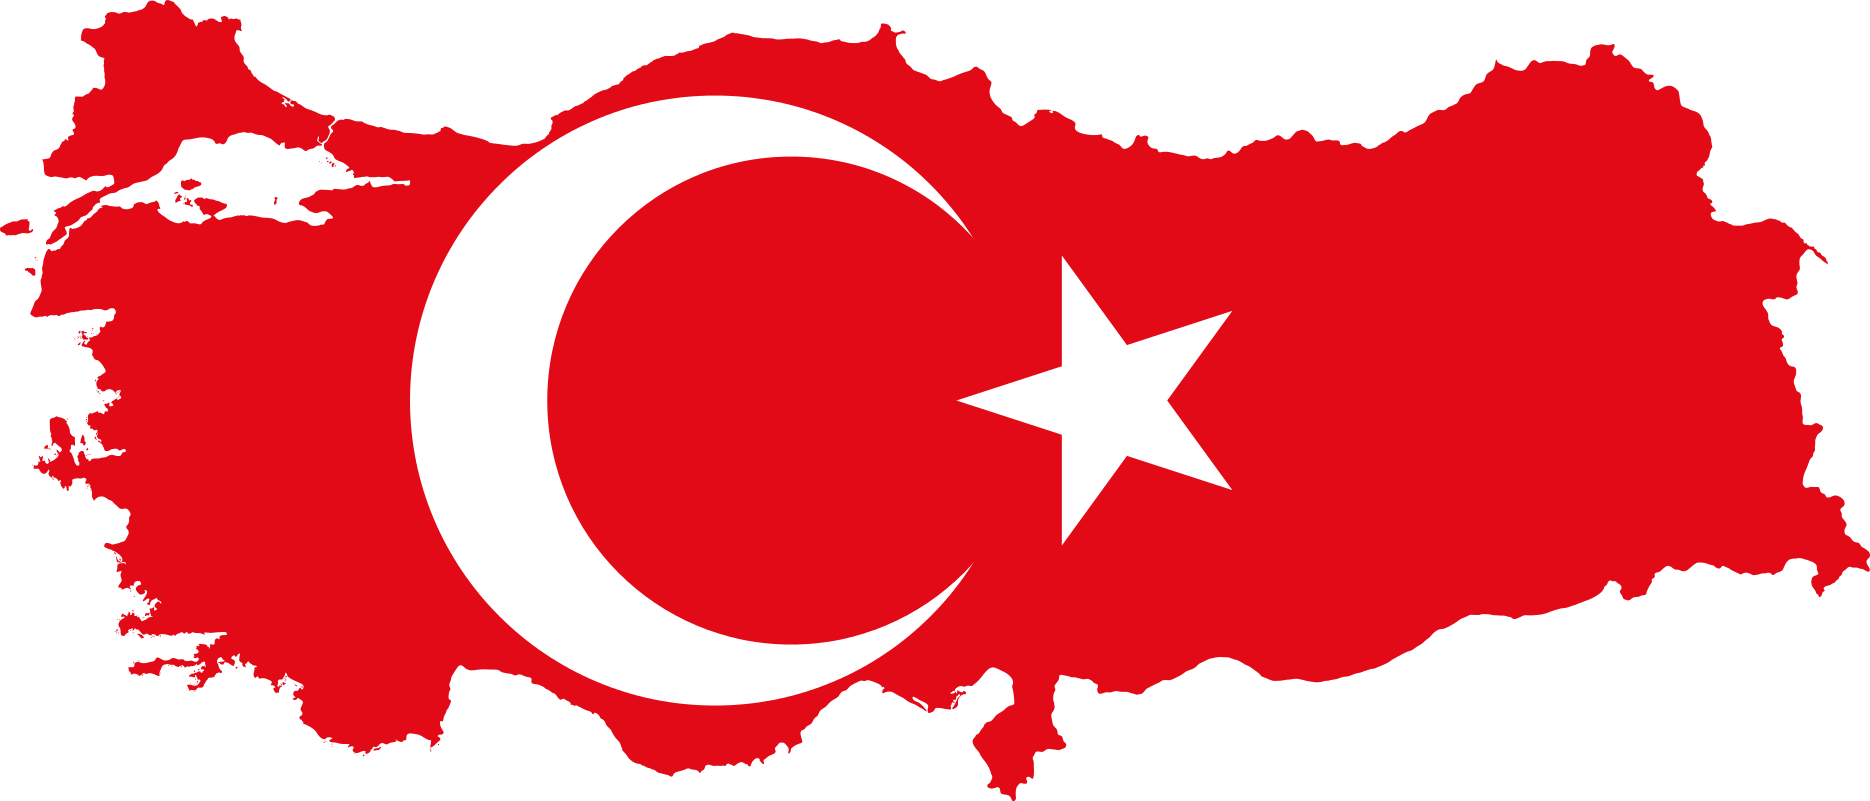 Flag-map of Turkey; Accessed via Wikimedia Commons